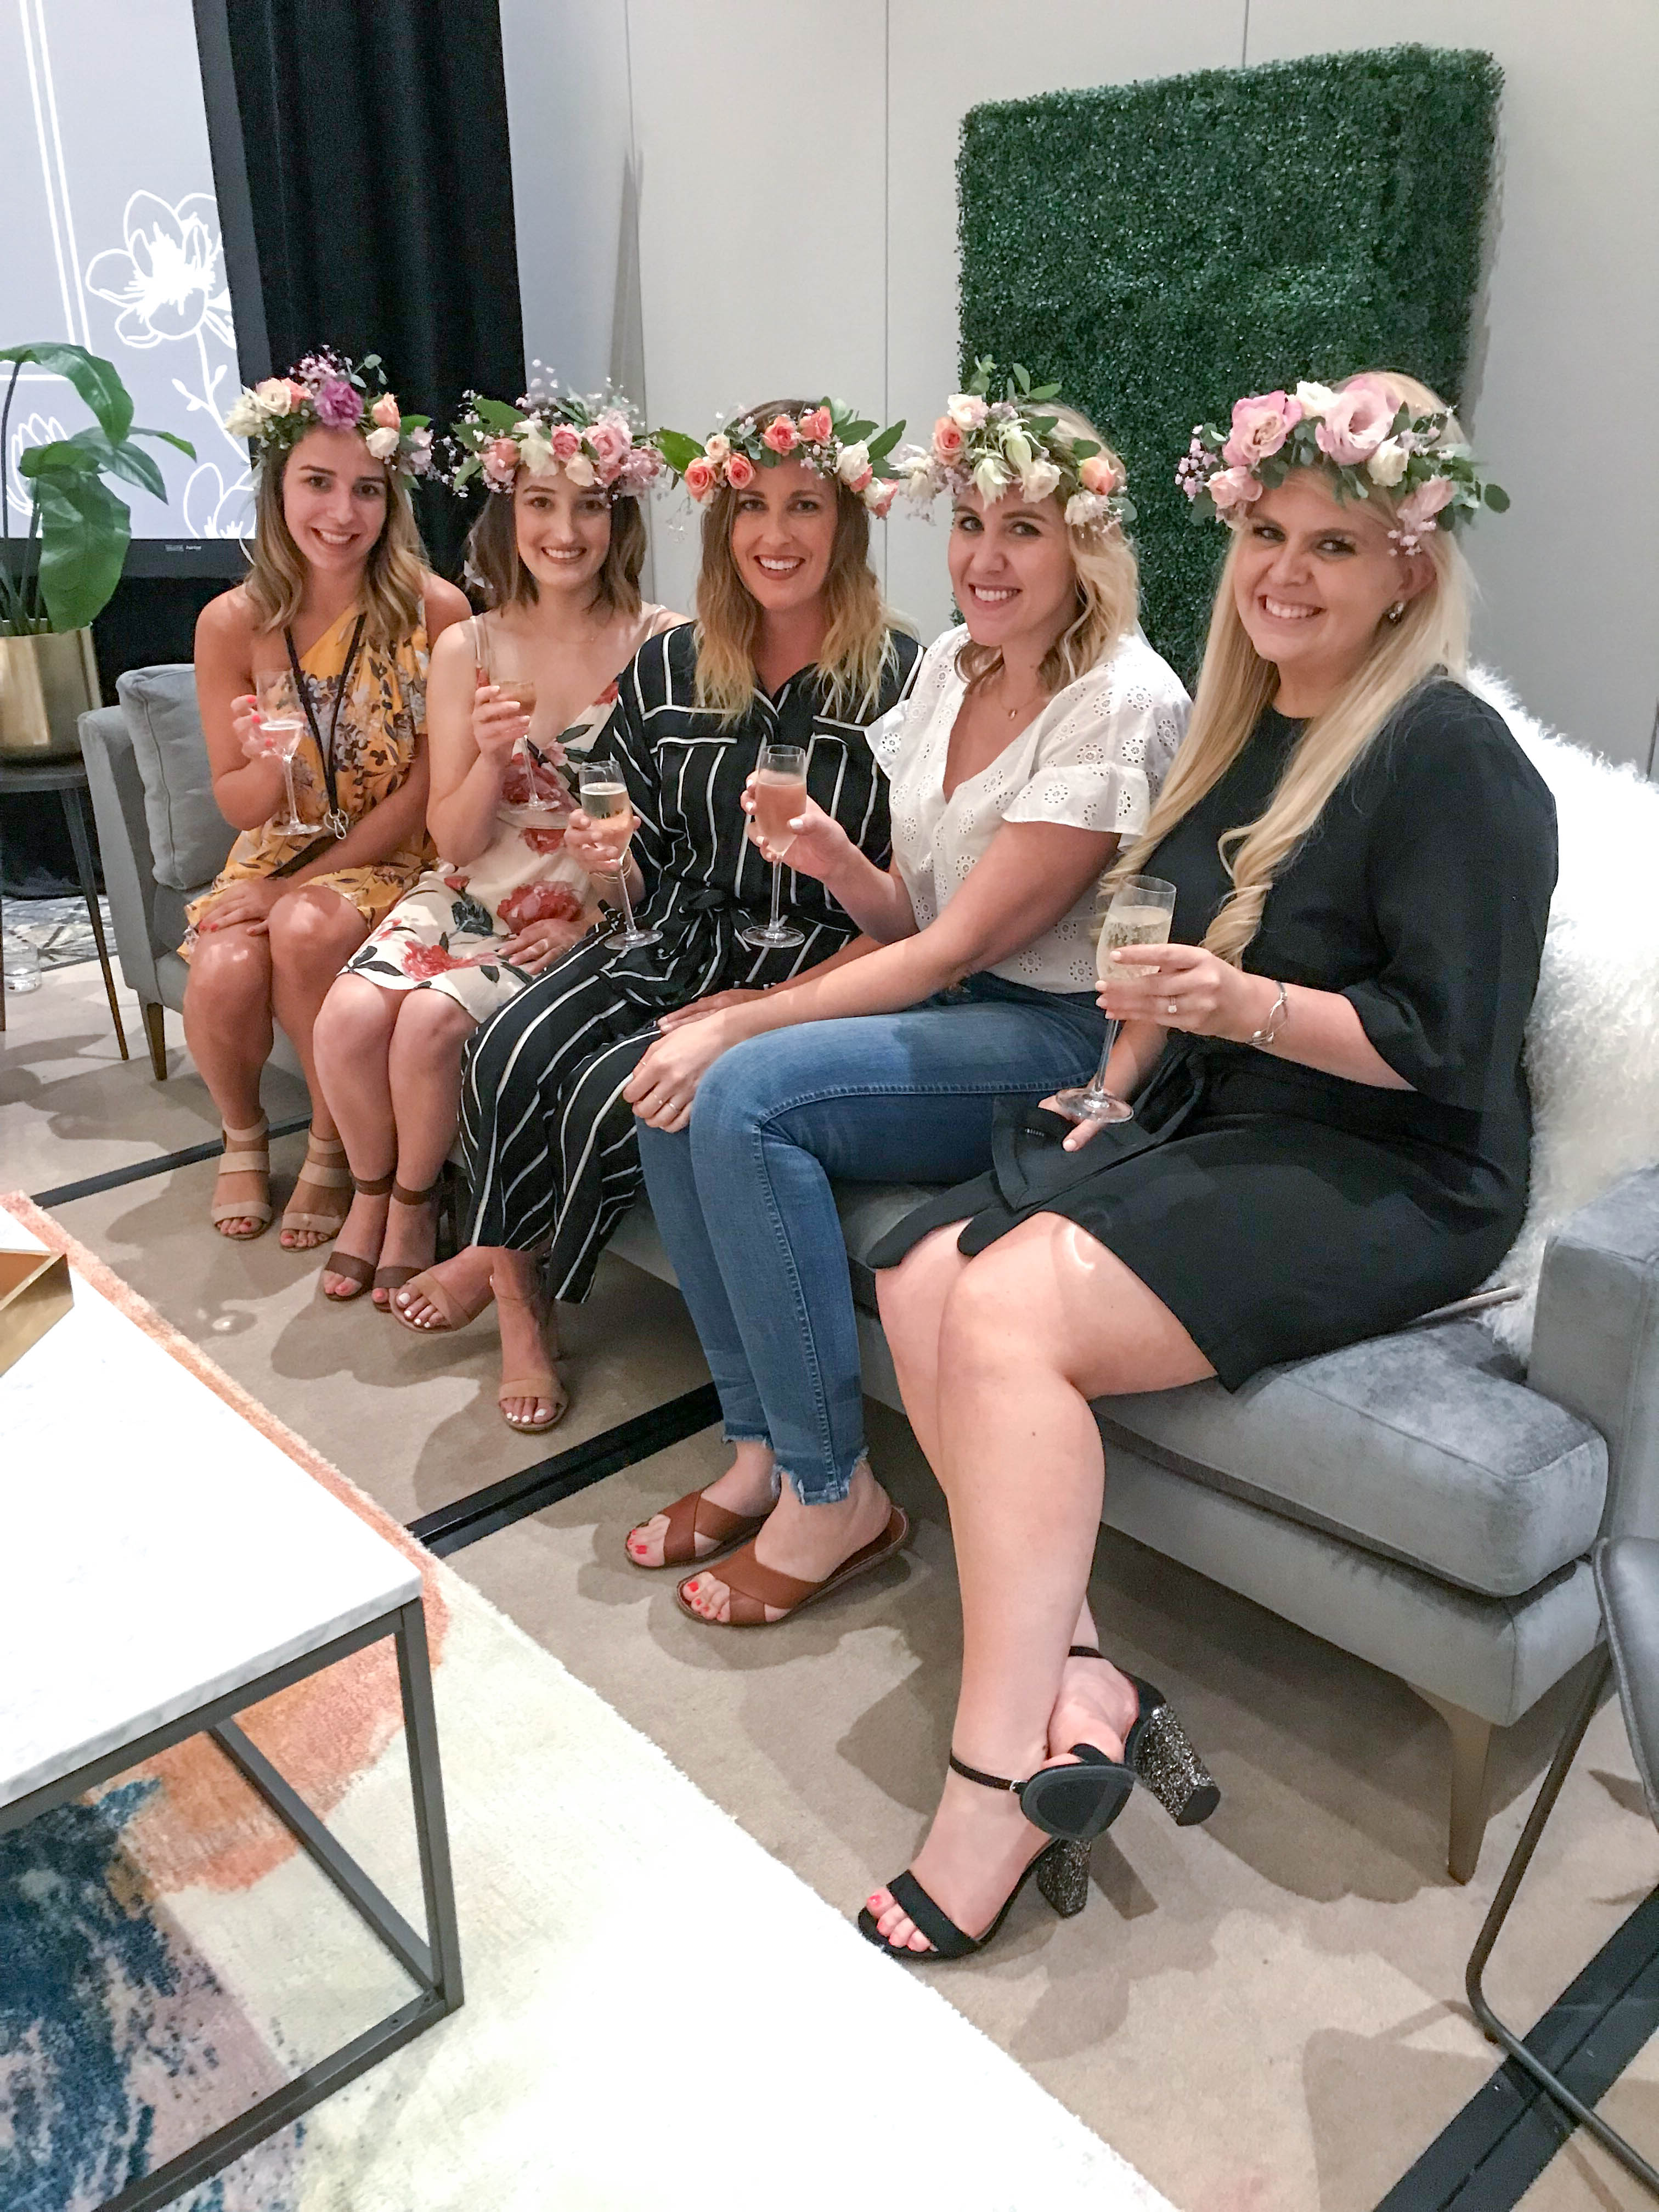 flower crowns at tbscon #tbscon #flowercrown #flowers #bloggers